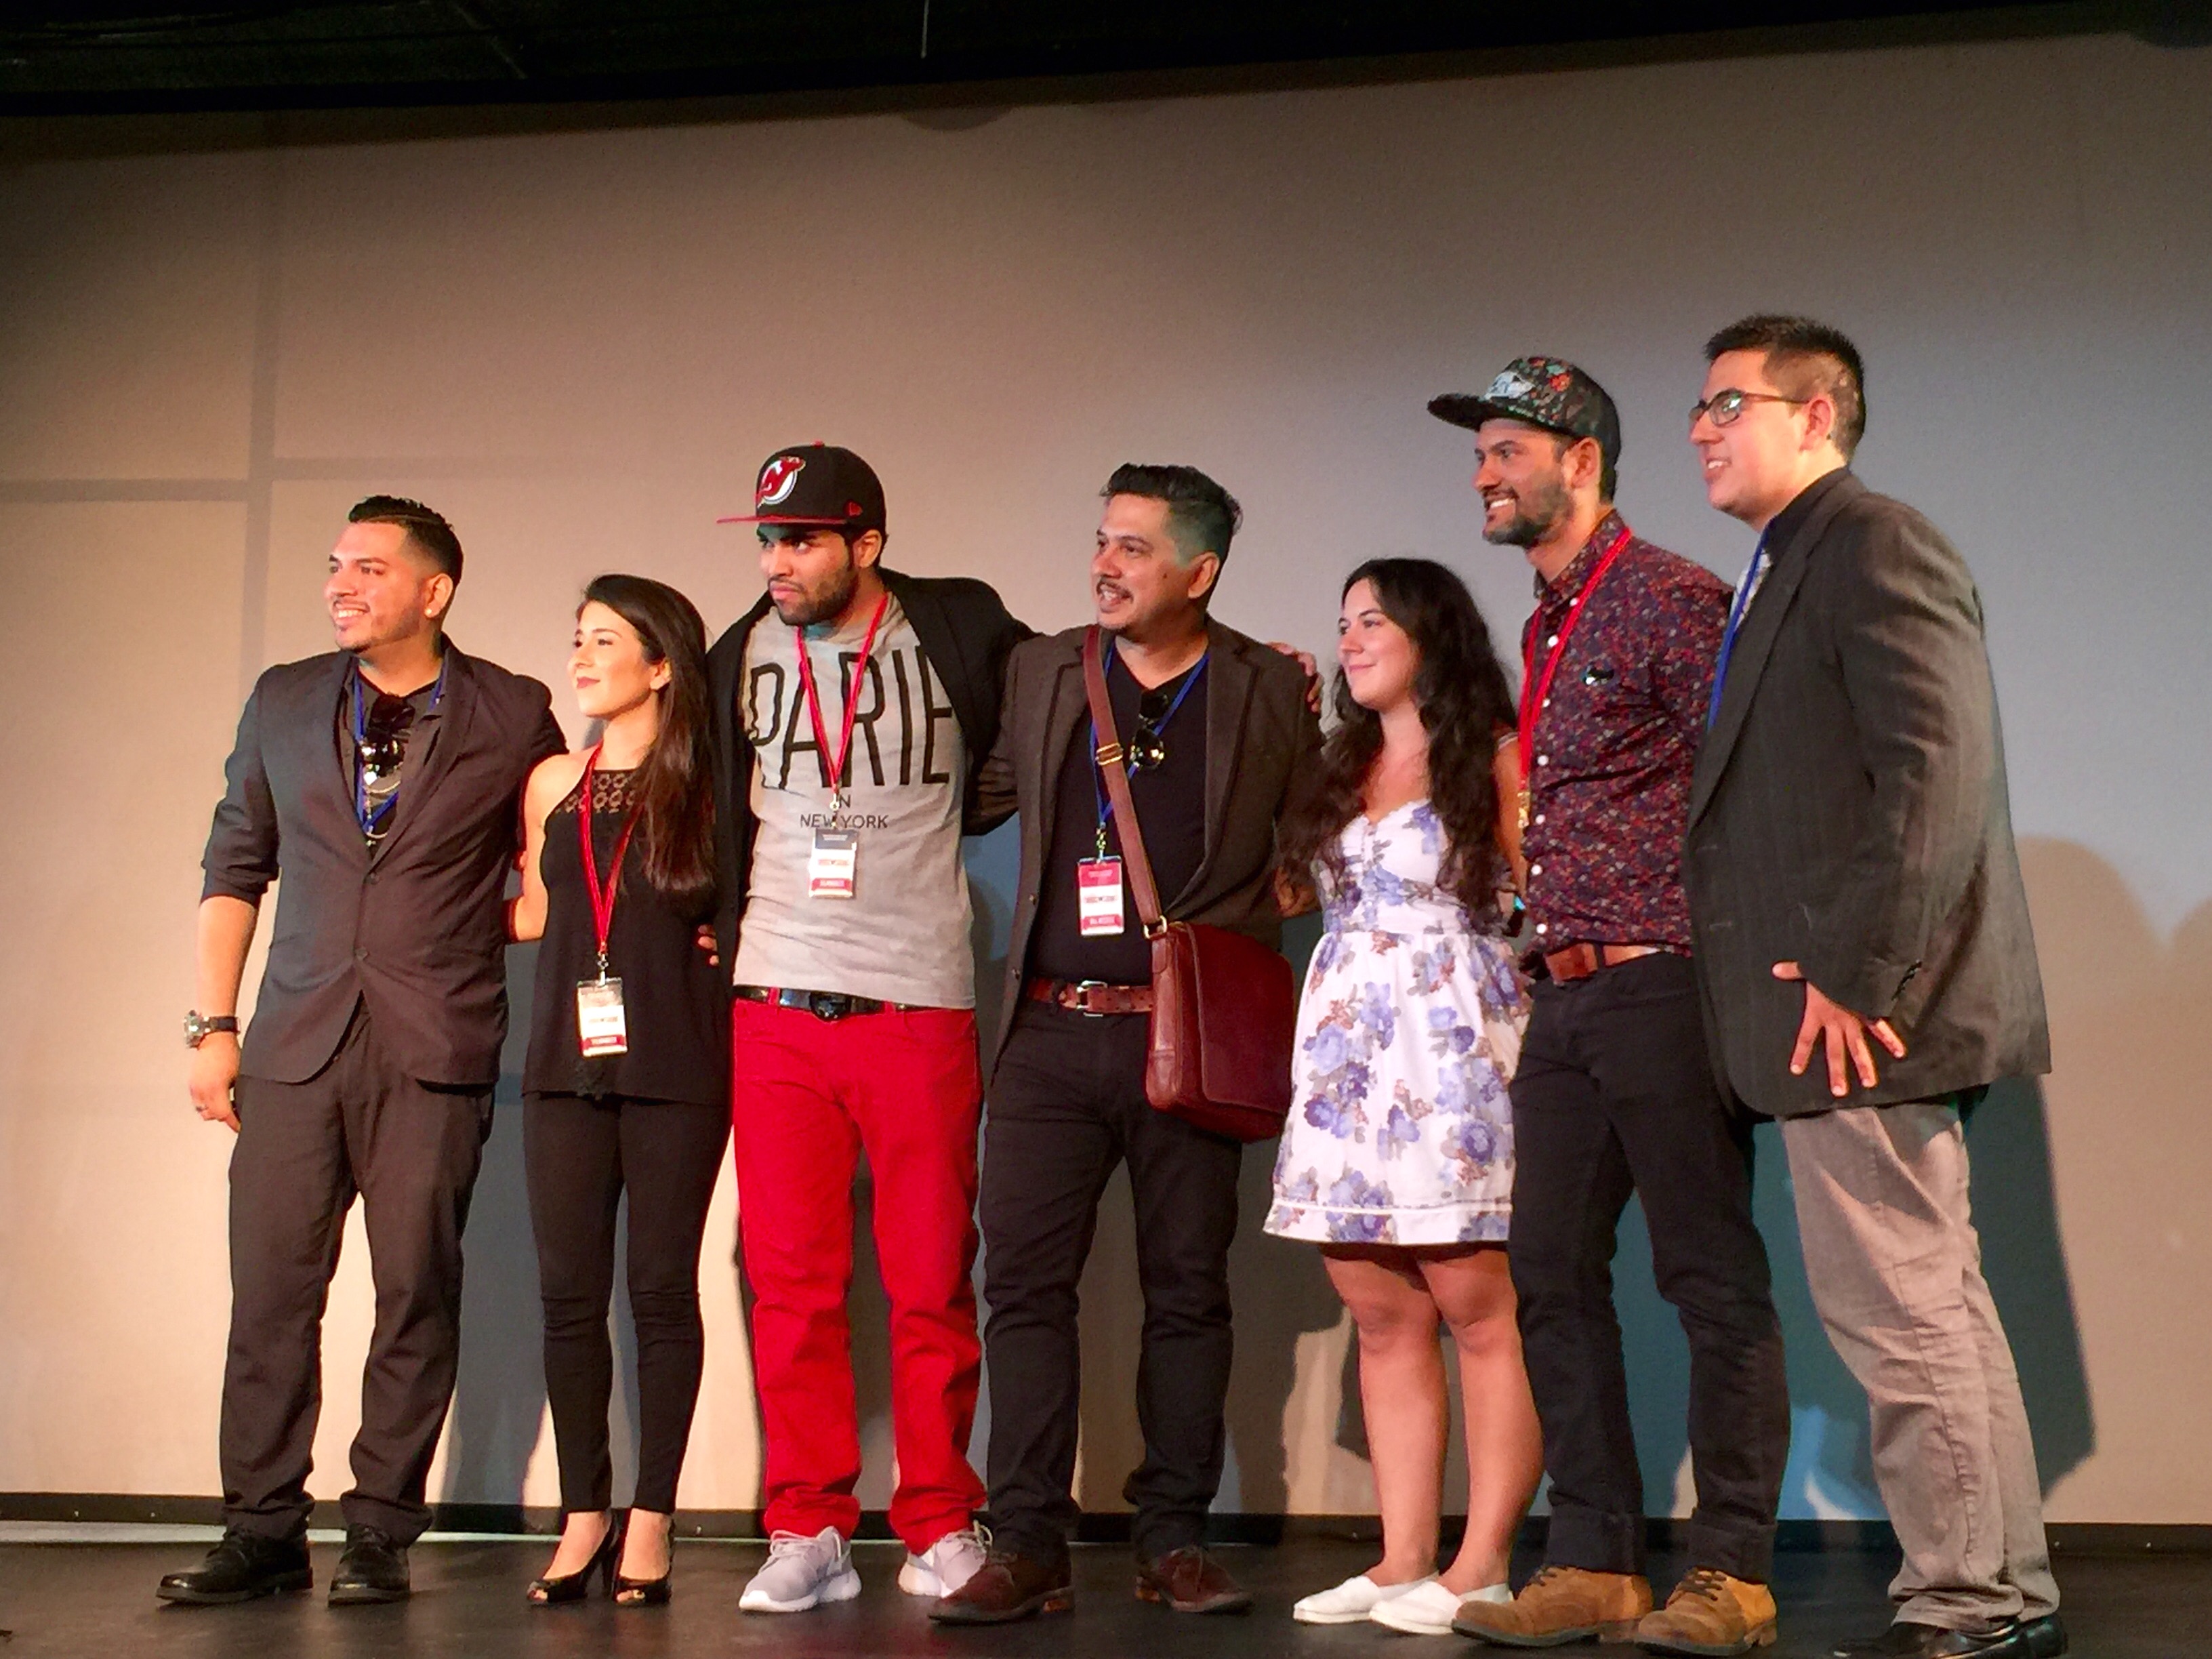 Director Marie J. Magdaleno at the Official Latino Film Festival in Harlem, NYC, 2015.